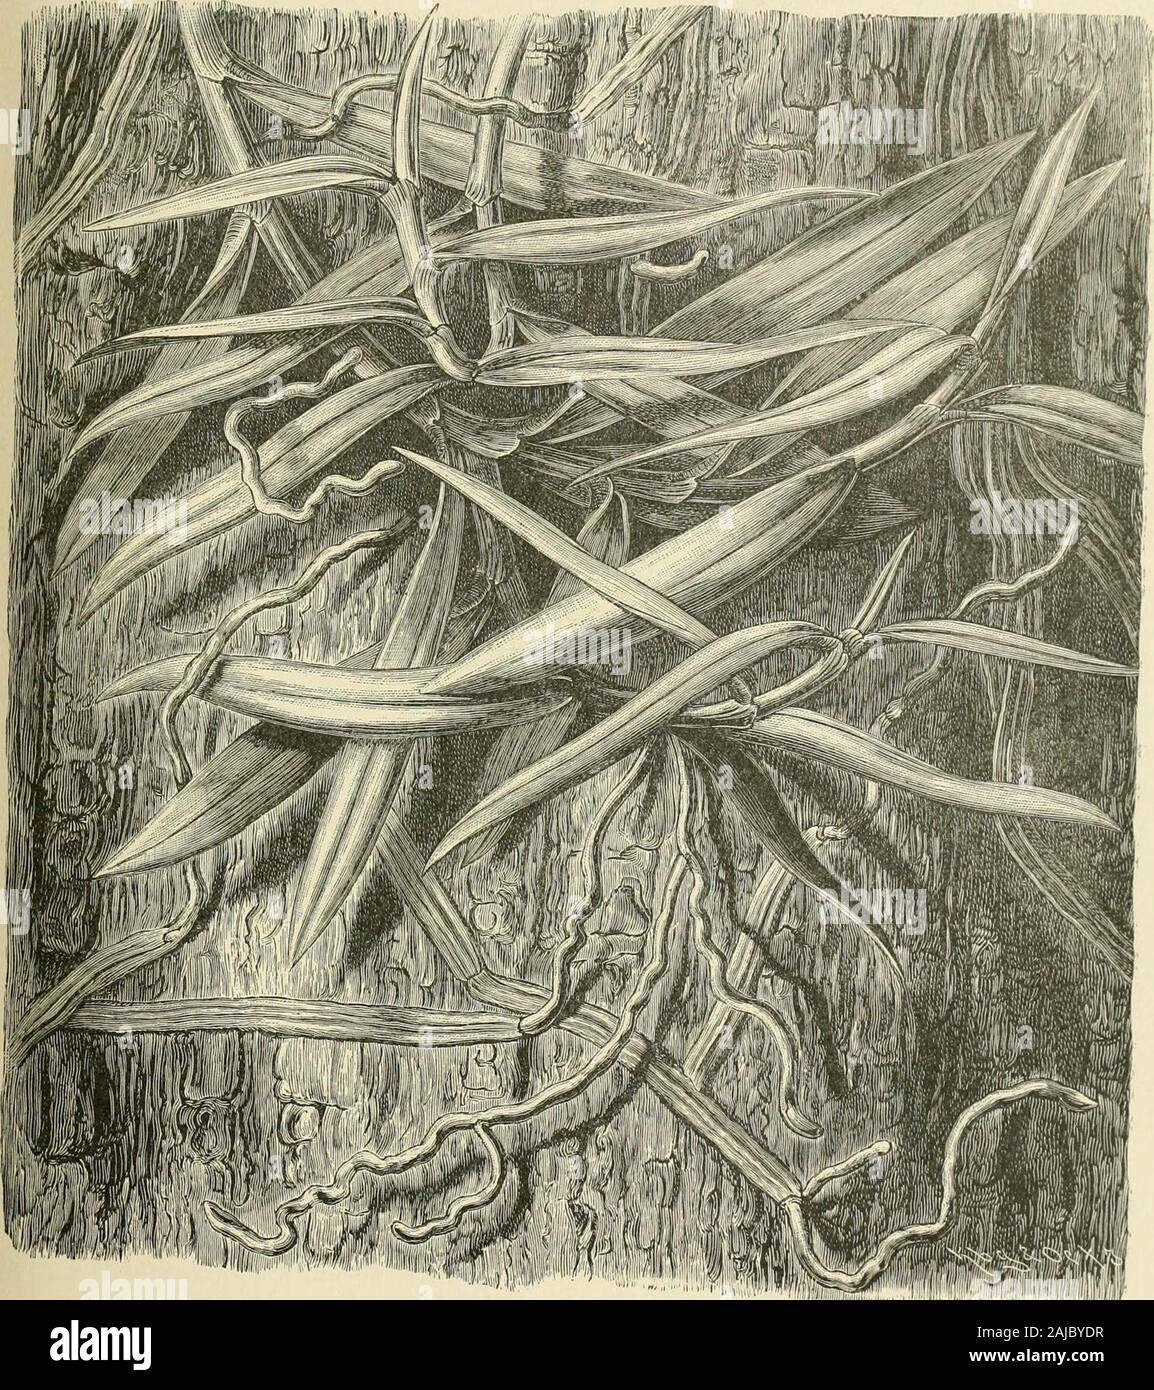 The natural history of plants, their forms, growth, reproduction, and distribution; . eply the compact bark, and their hyphalfilaments ramify between its dead cells. Other plants, instead of piercing throughthe substance of the bark, lay themselves flat upon its surface, and grow to it sofirmly that if one tries to lift them away from the substratum, either part of thelatter breaks oflf, or the adnata cell-strata are rent, but there is no separation of theone from the other. If a tuft of moss (e.g. Orthotrichum fallax, 0. tenellum, or0. pollens), growing on bark, or a liverwort {e.g. Fridlania Stock Photo